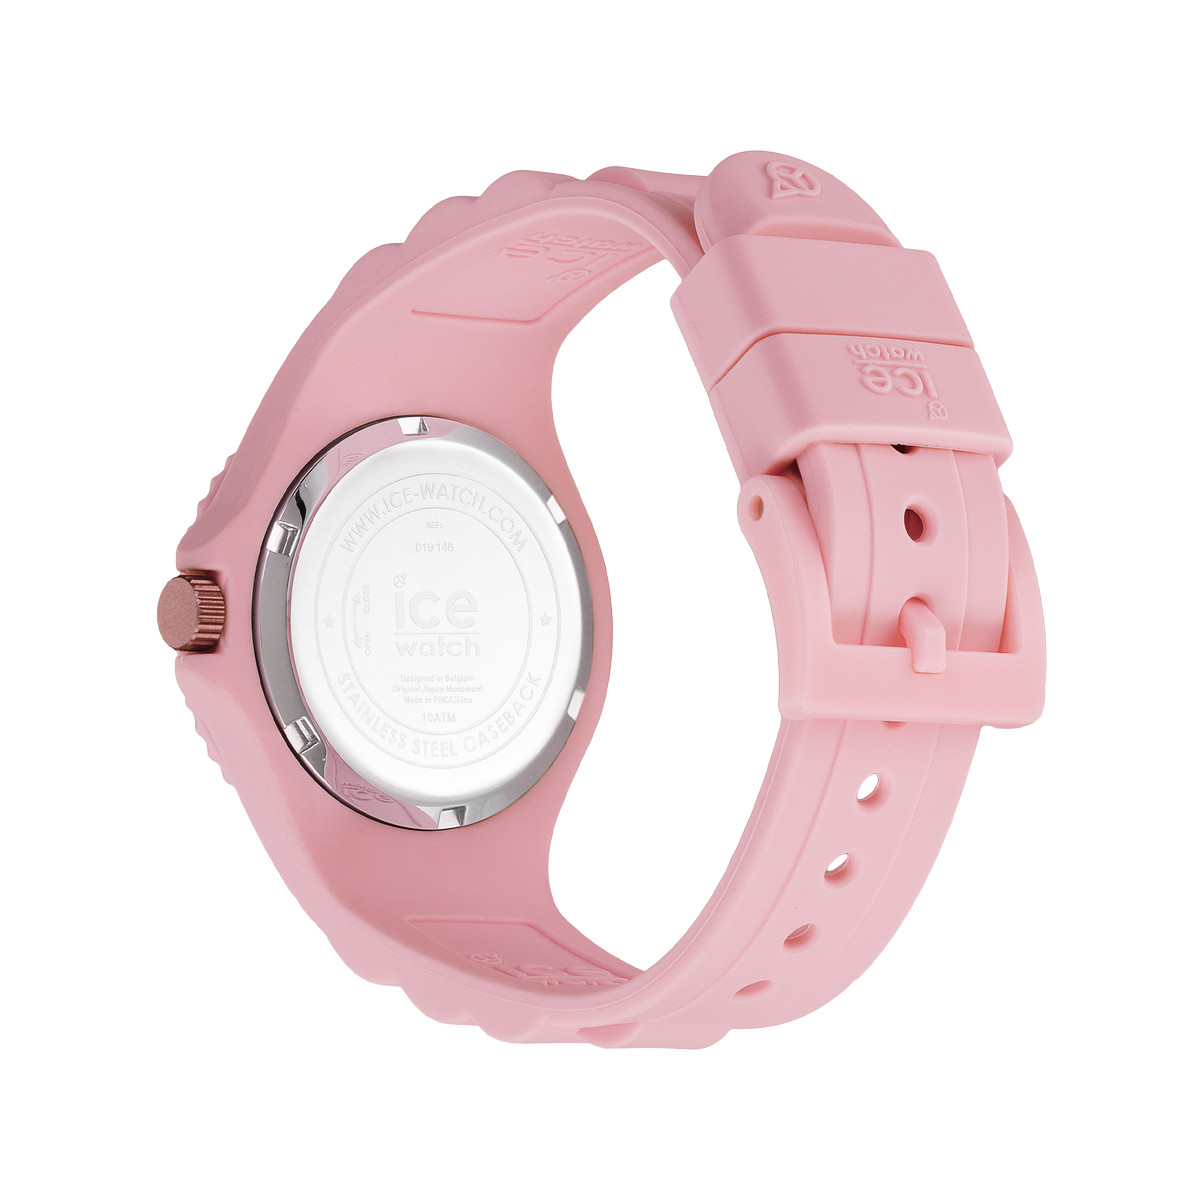 Montre Ice Watch small femme plastique silicone rose - vue 3